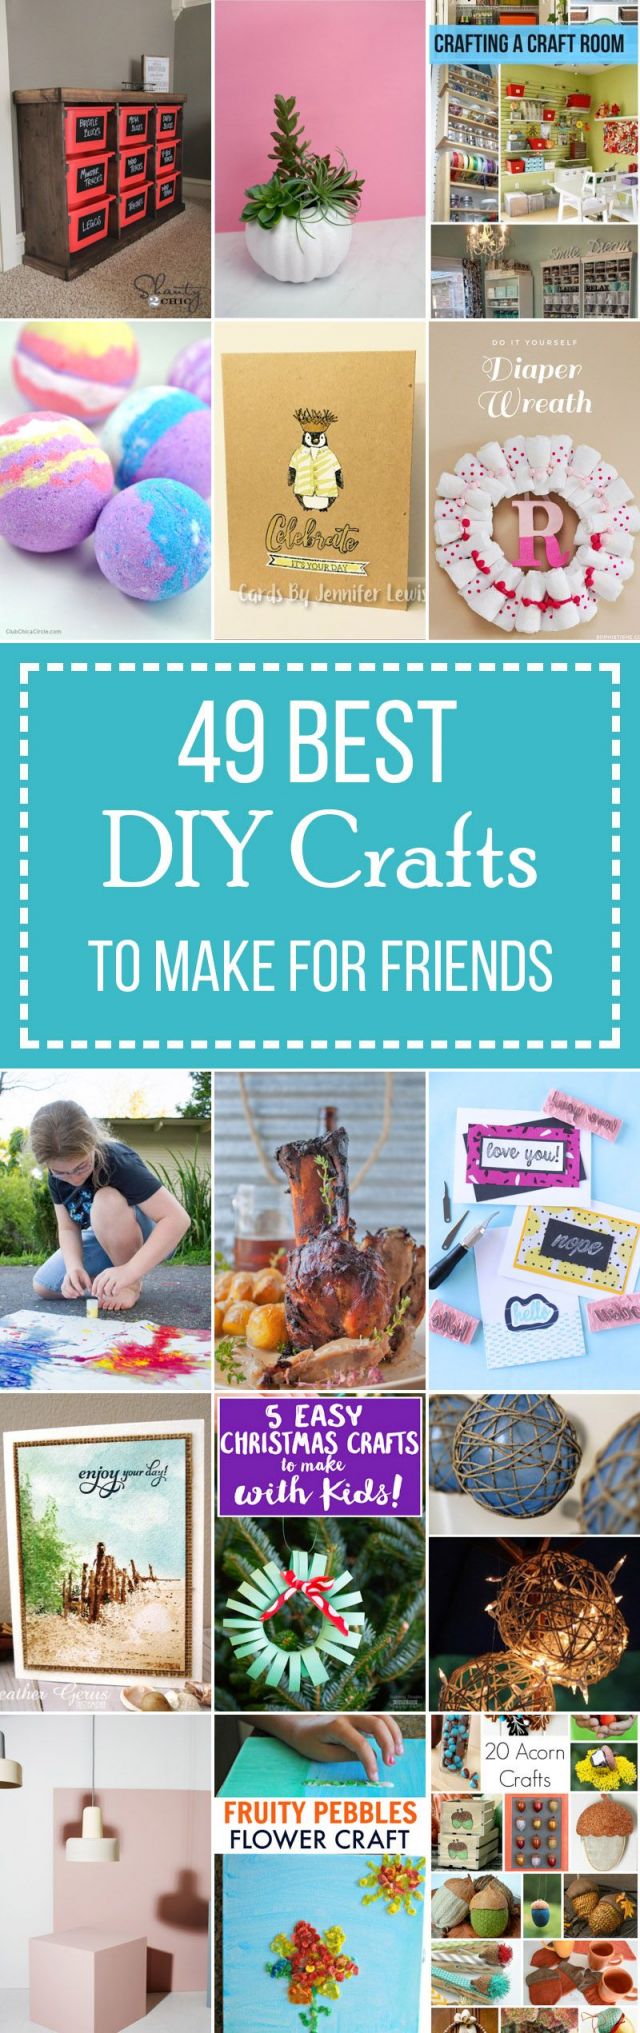  Adorable fun diy crafts to do with friends 